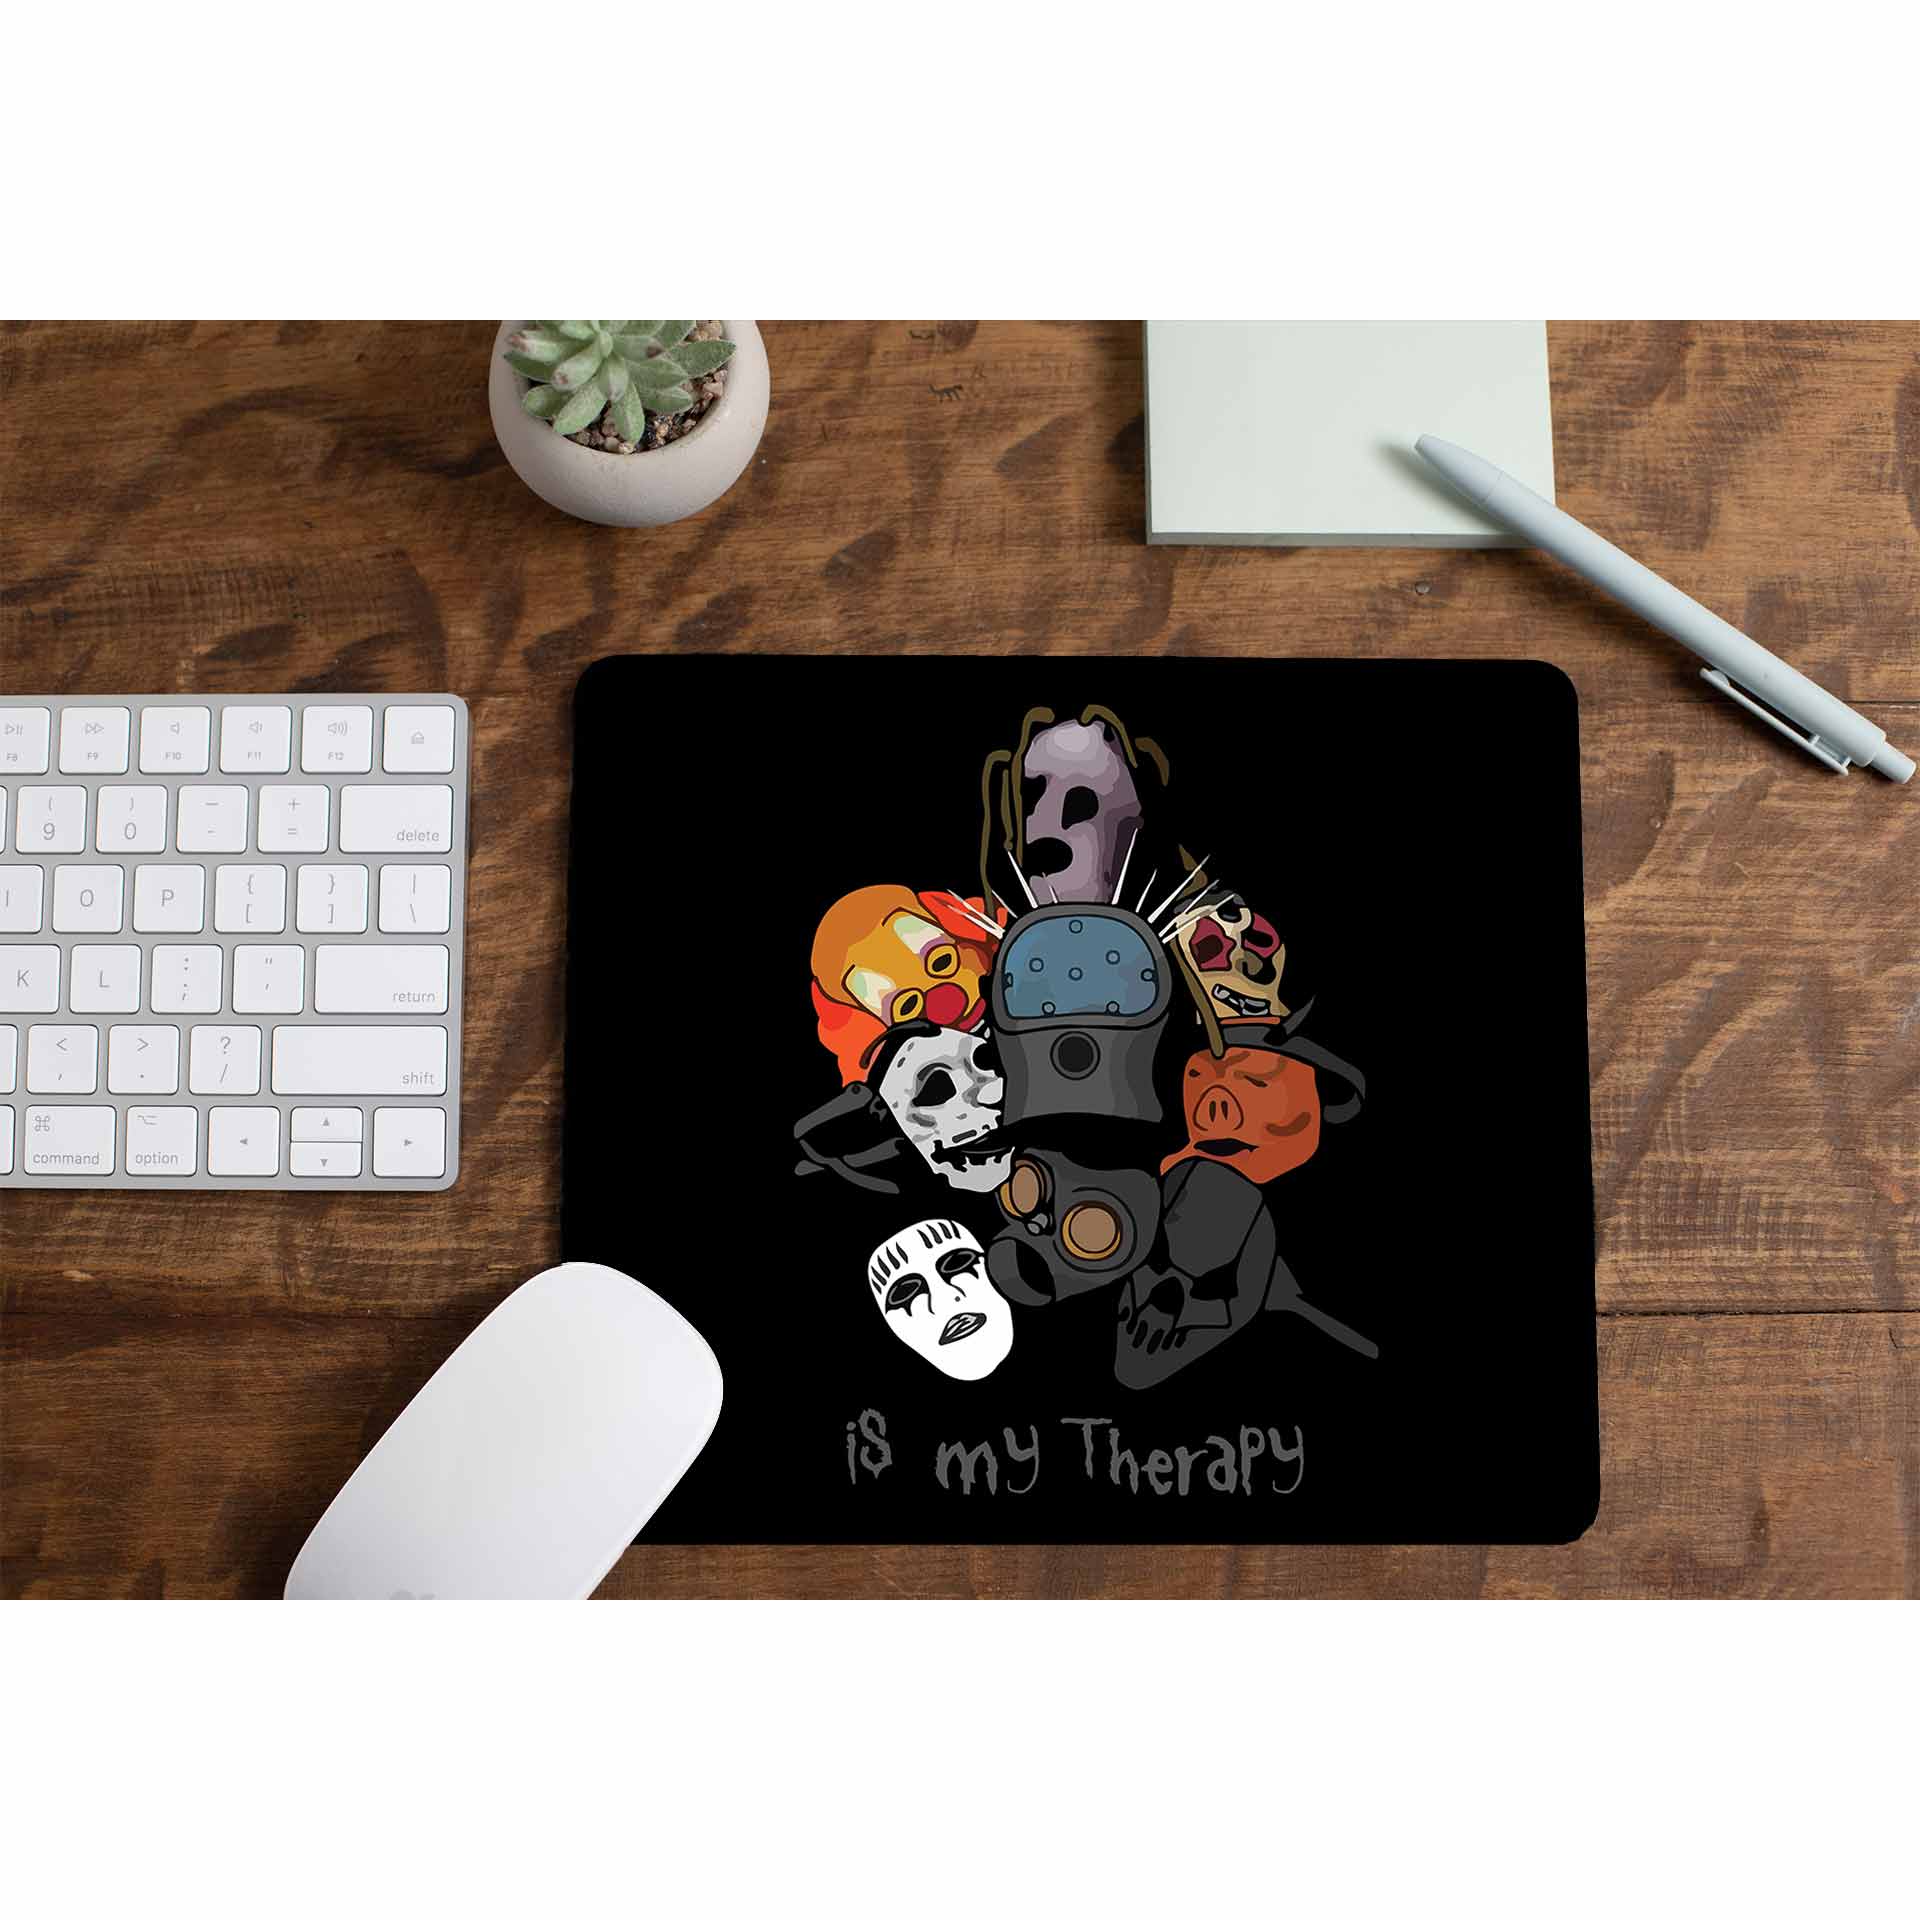 Buy Slipknot Mousepad - My Therapy at 5% OFF 🤑 – The Banyan Tee